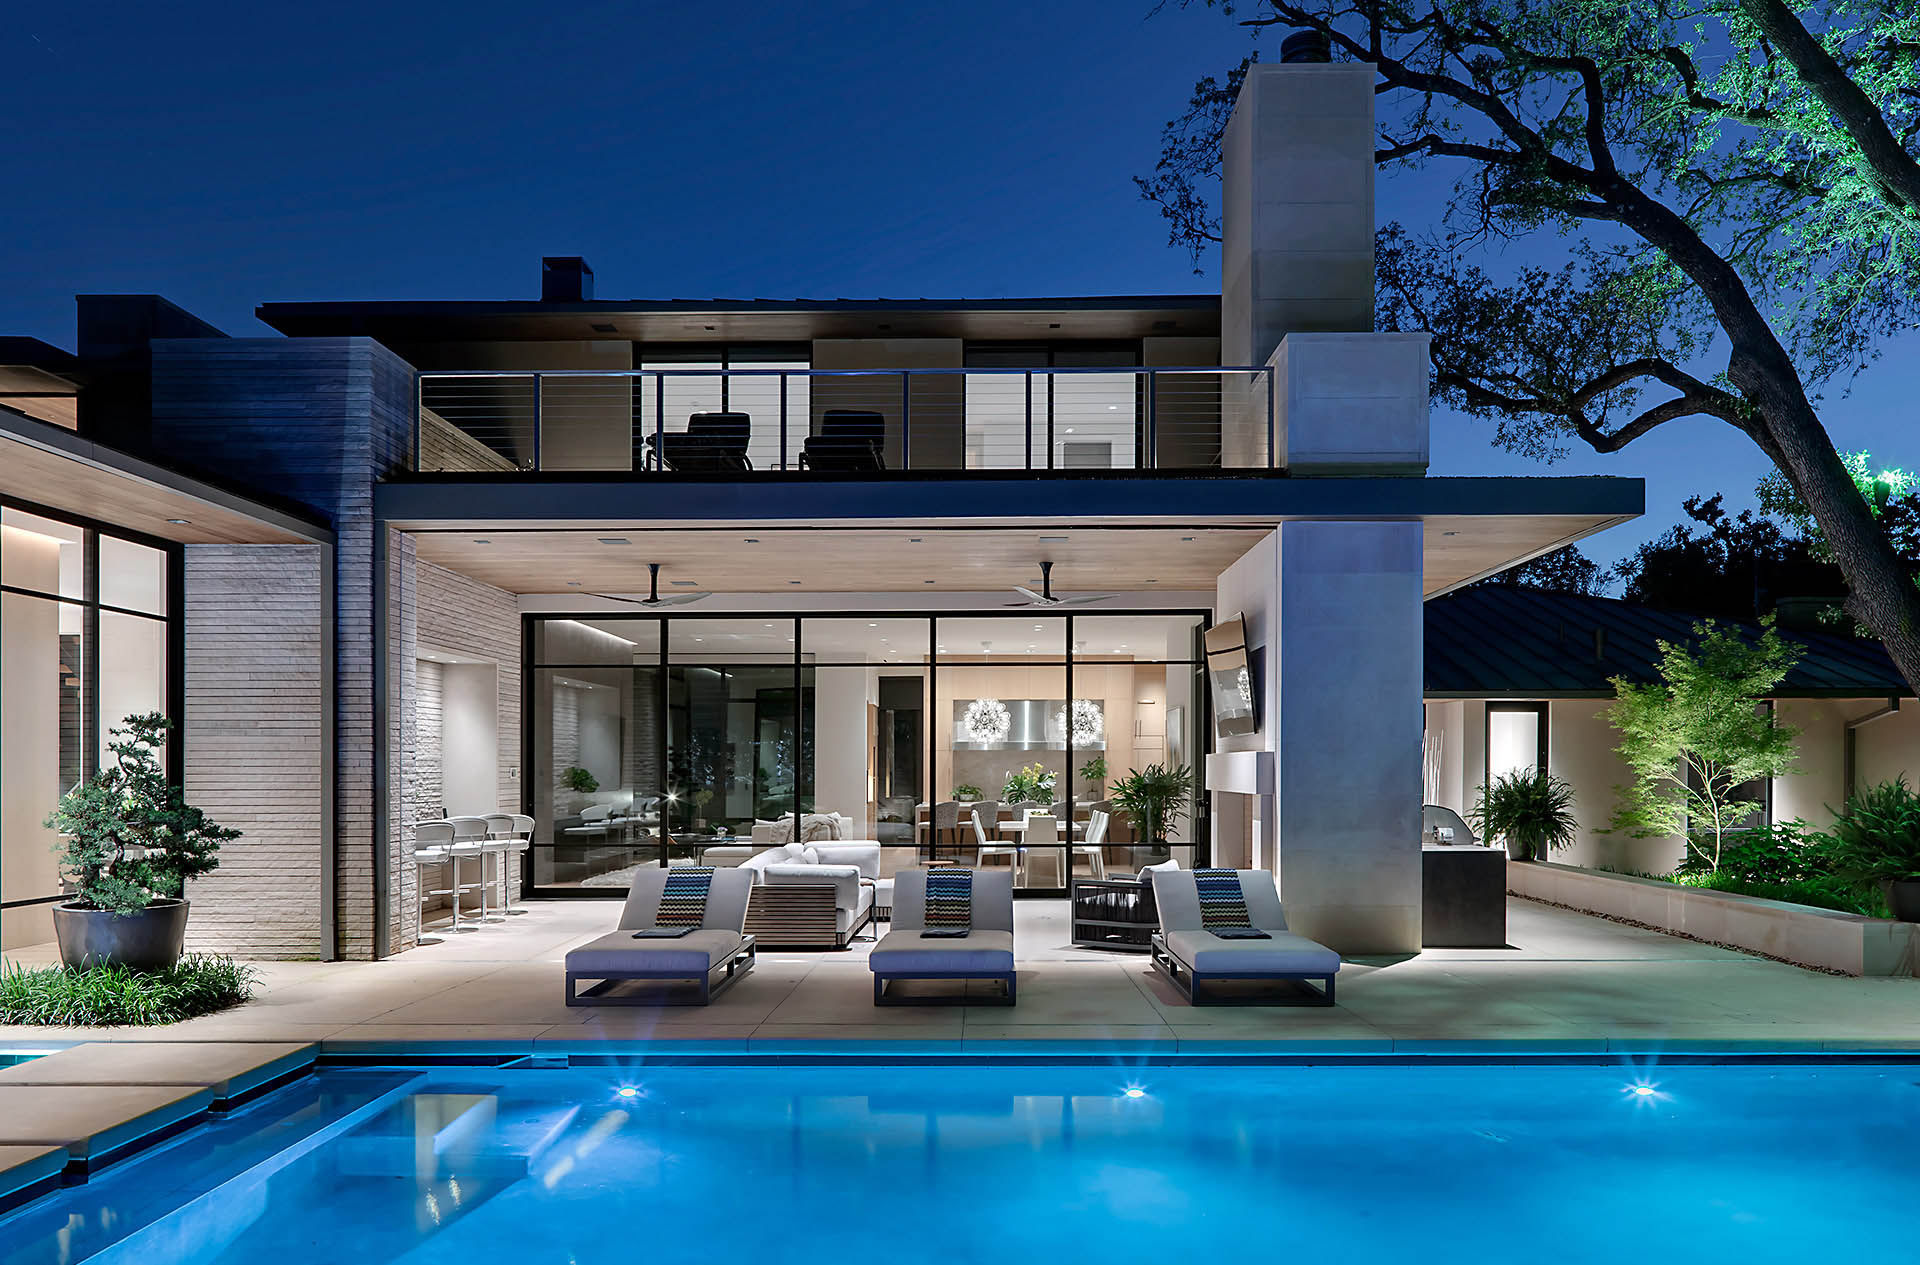 A Bernbaum/Magadini Architects modern contemporary in Preston Hollow Dallas Texas featuring views of living area from pool terrace.